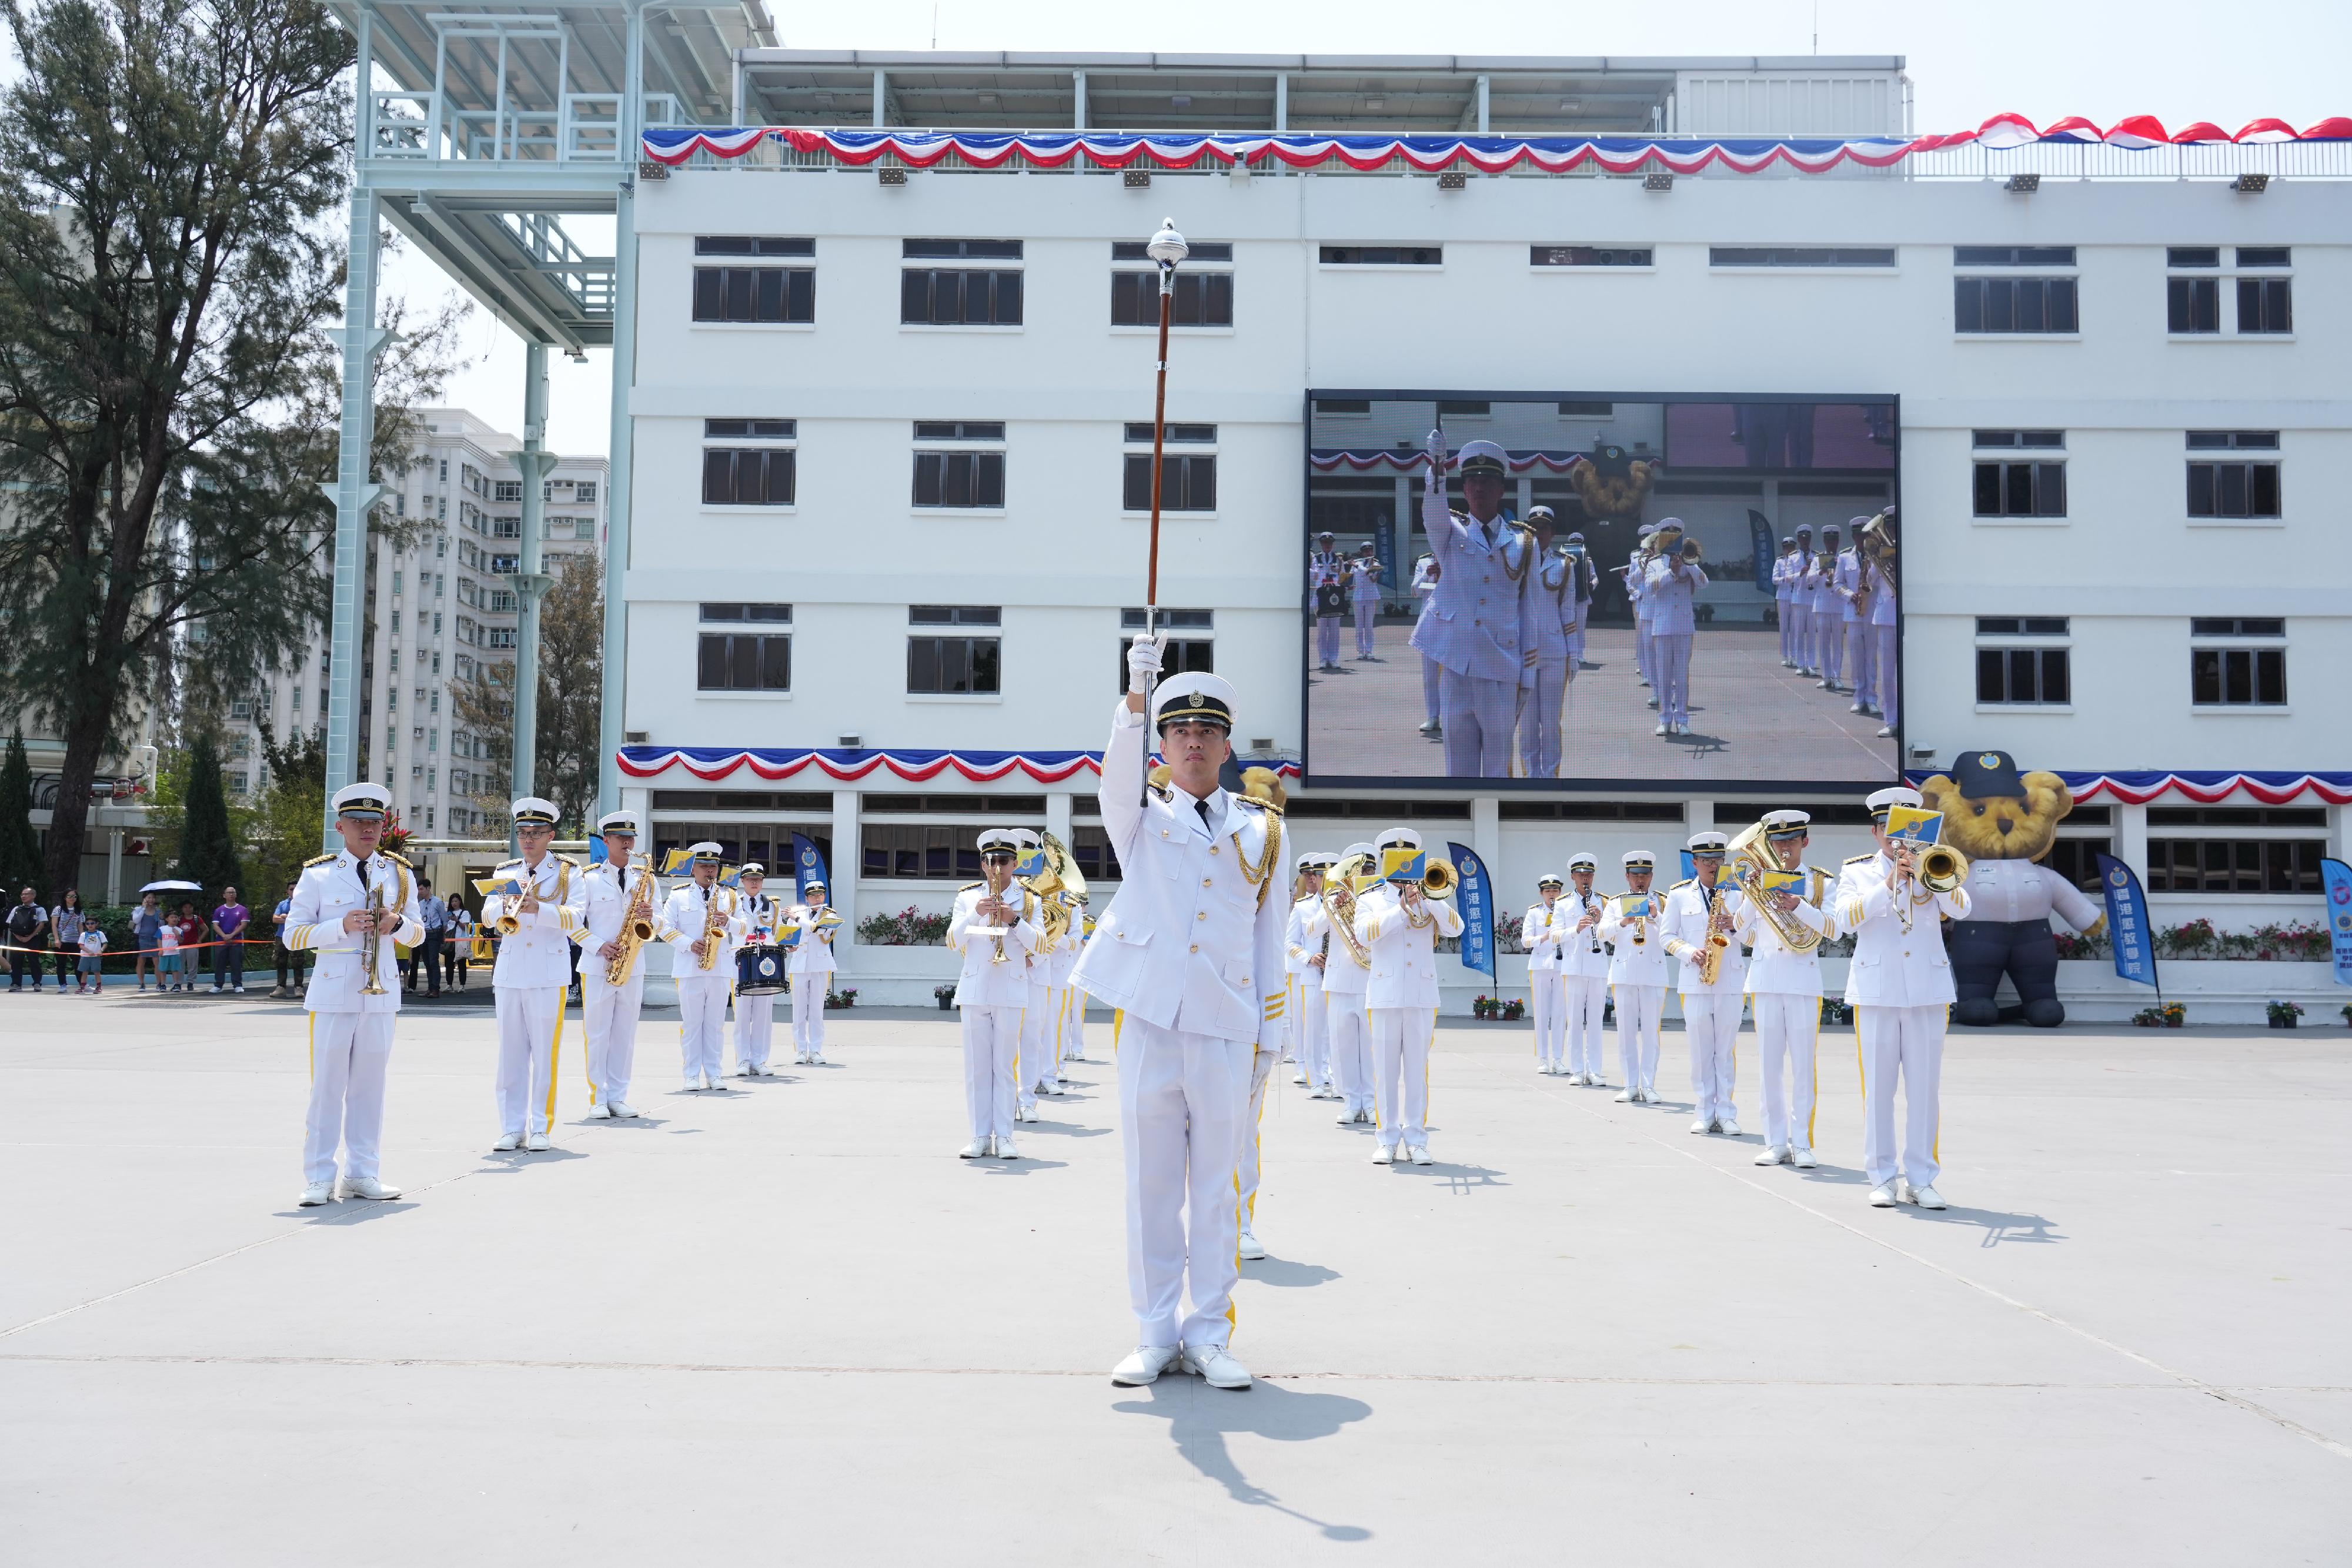 To support National Security Education Day on April 15, the Correctional Services Department held an open day at the Hong Kong Correctional Services Academy today (April 13) to raise public awareness of national security and enhance public understanding of its work in safeguarding national security. Photo shows a music performance by the Marching Band.